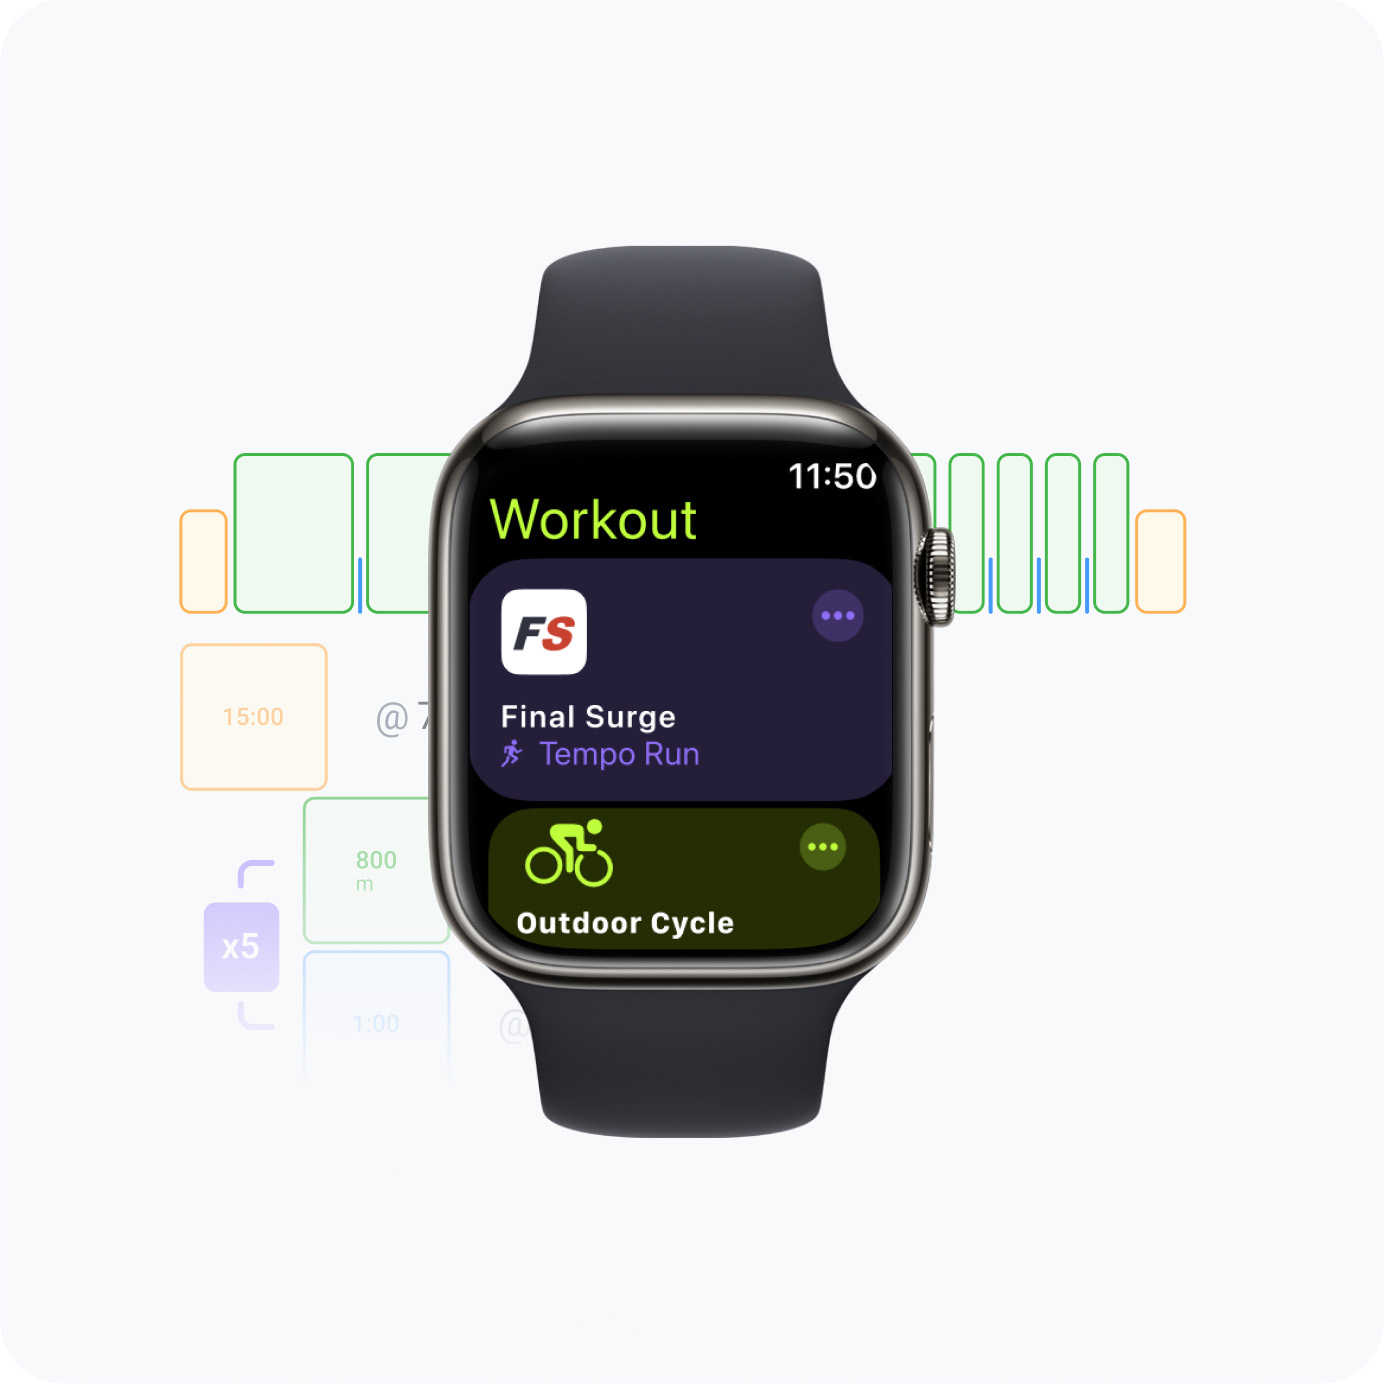 Apple Health and Apple watch integration